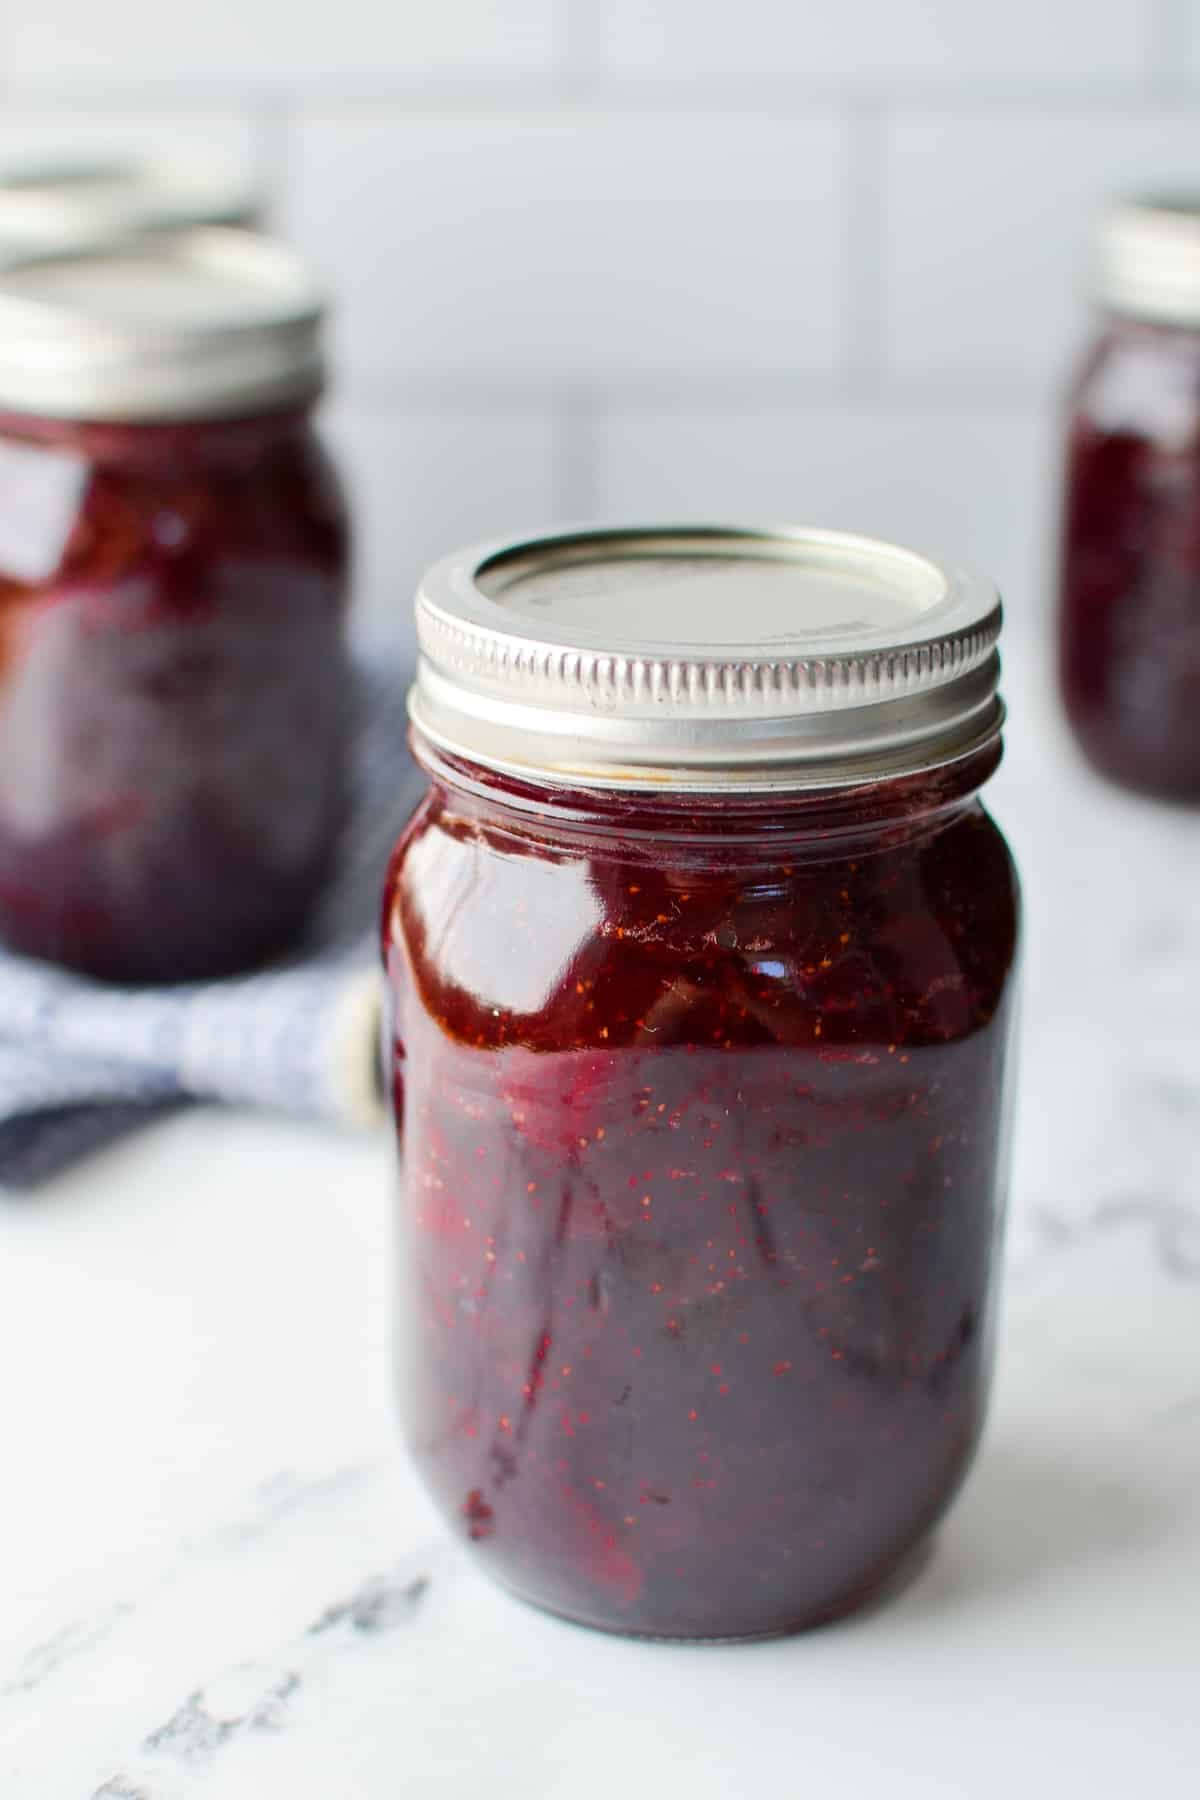 A jar of strawberry jam on a counter, with others in the background.